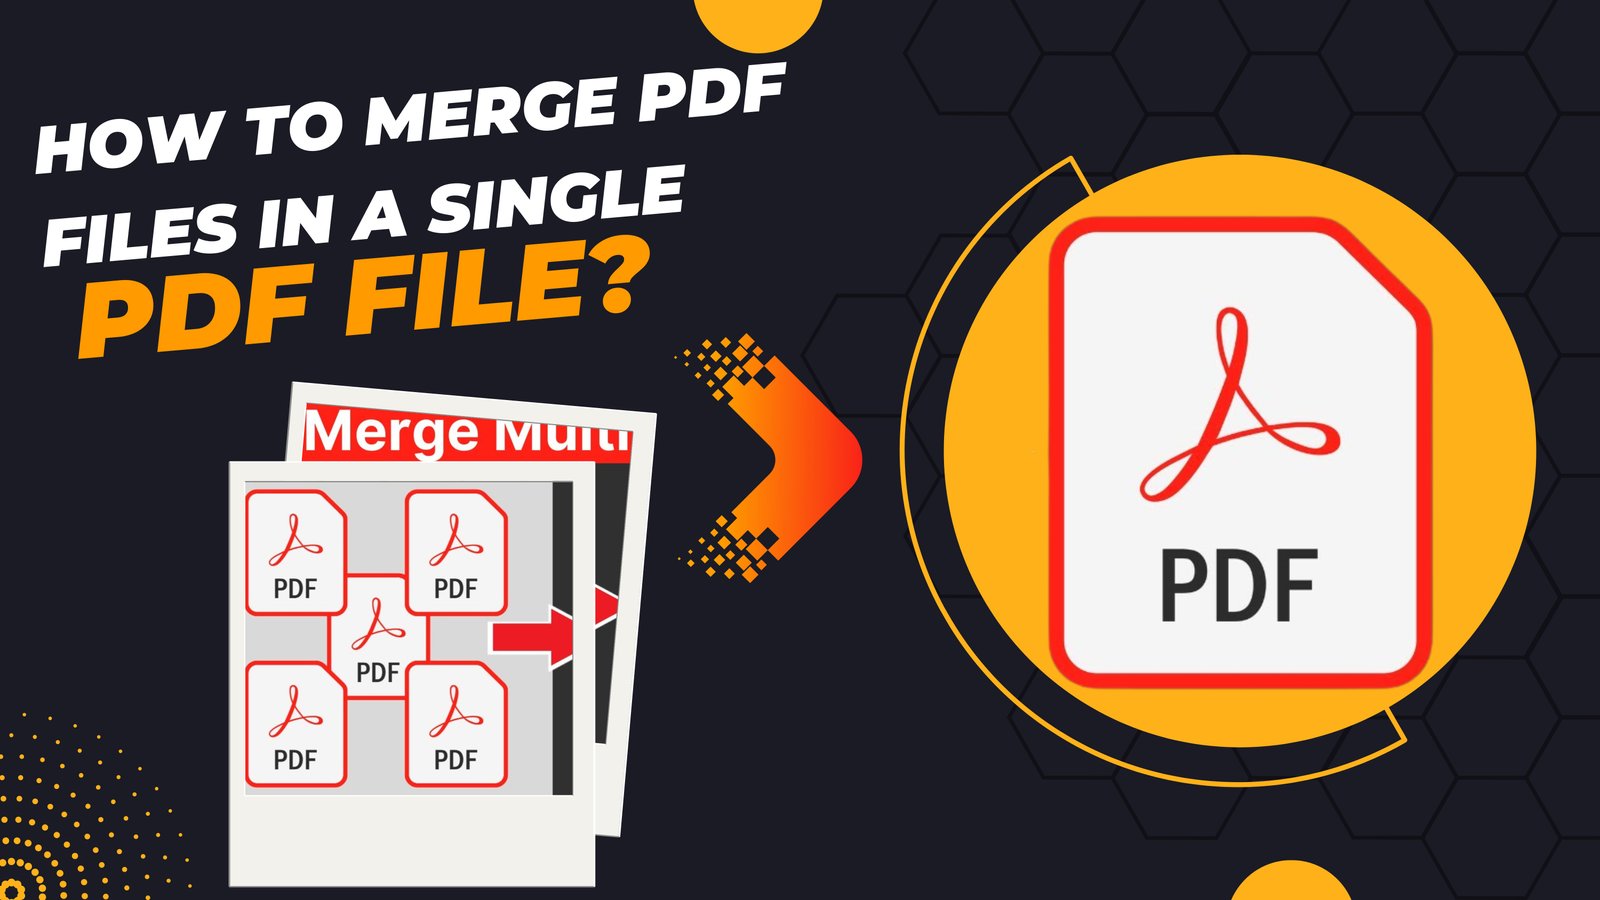 How to merge PDF files in a single PDF File?